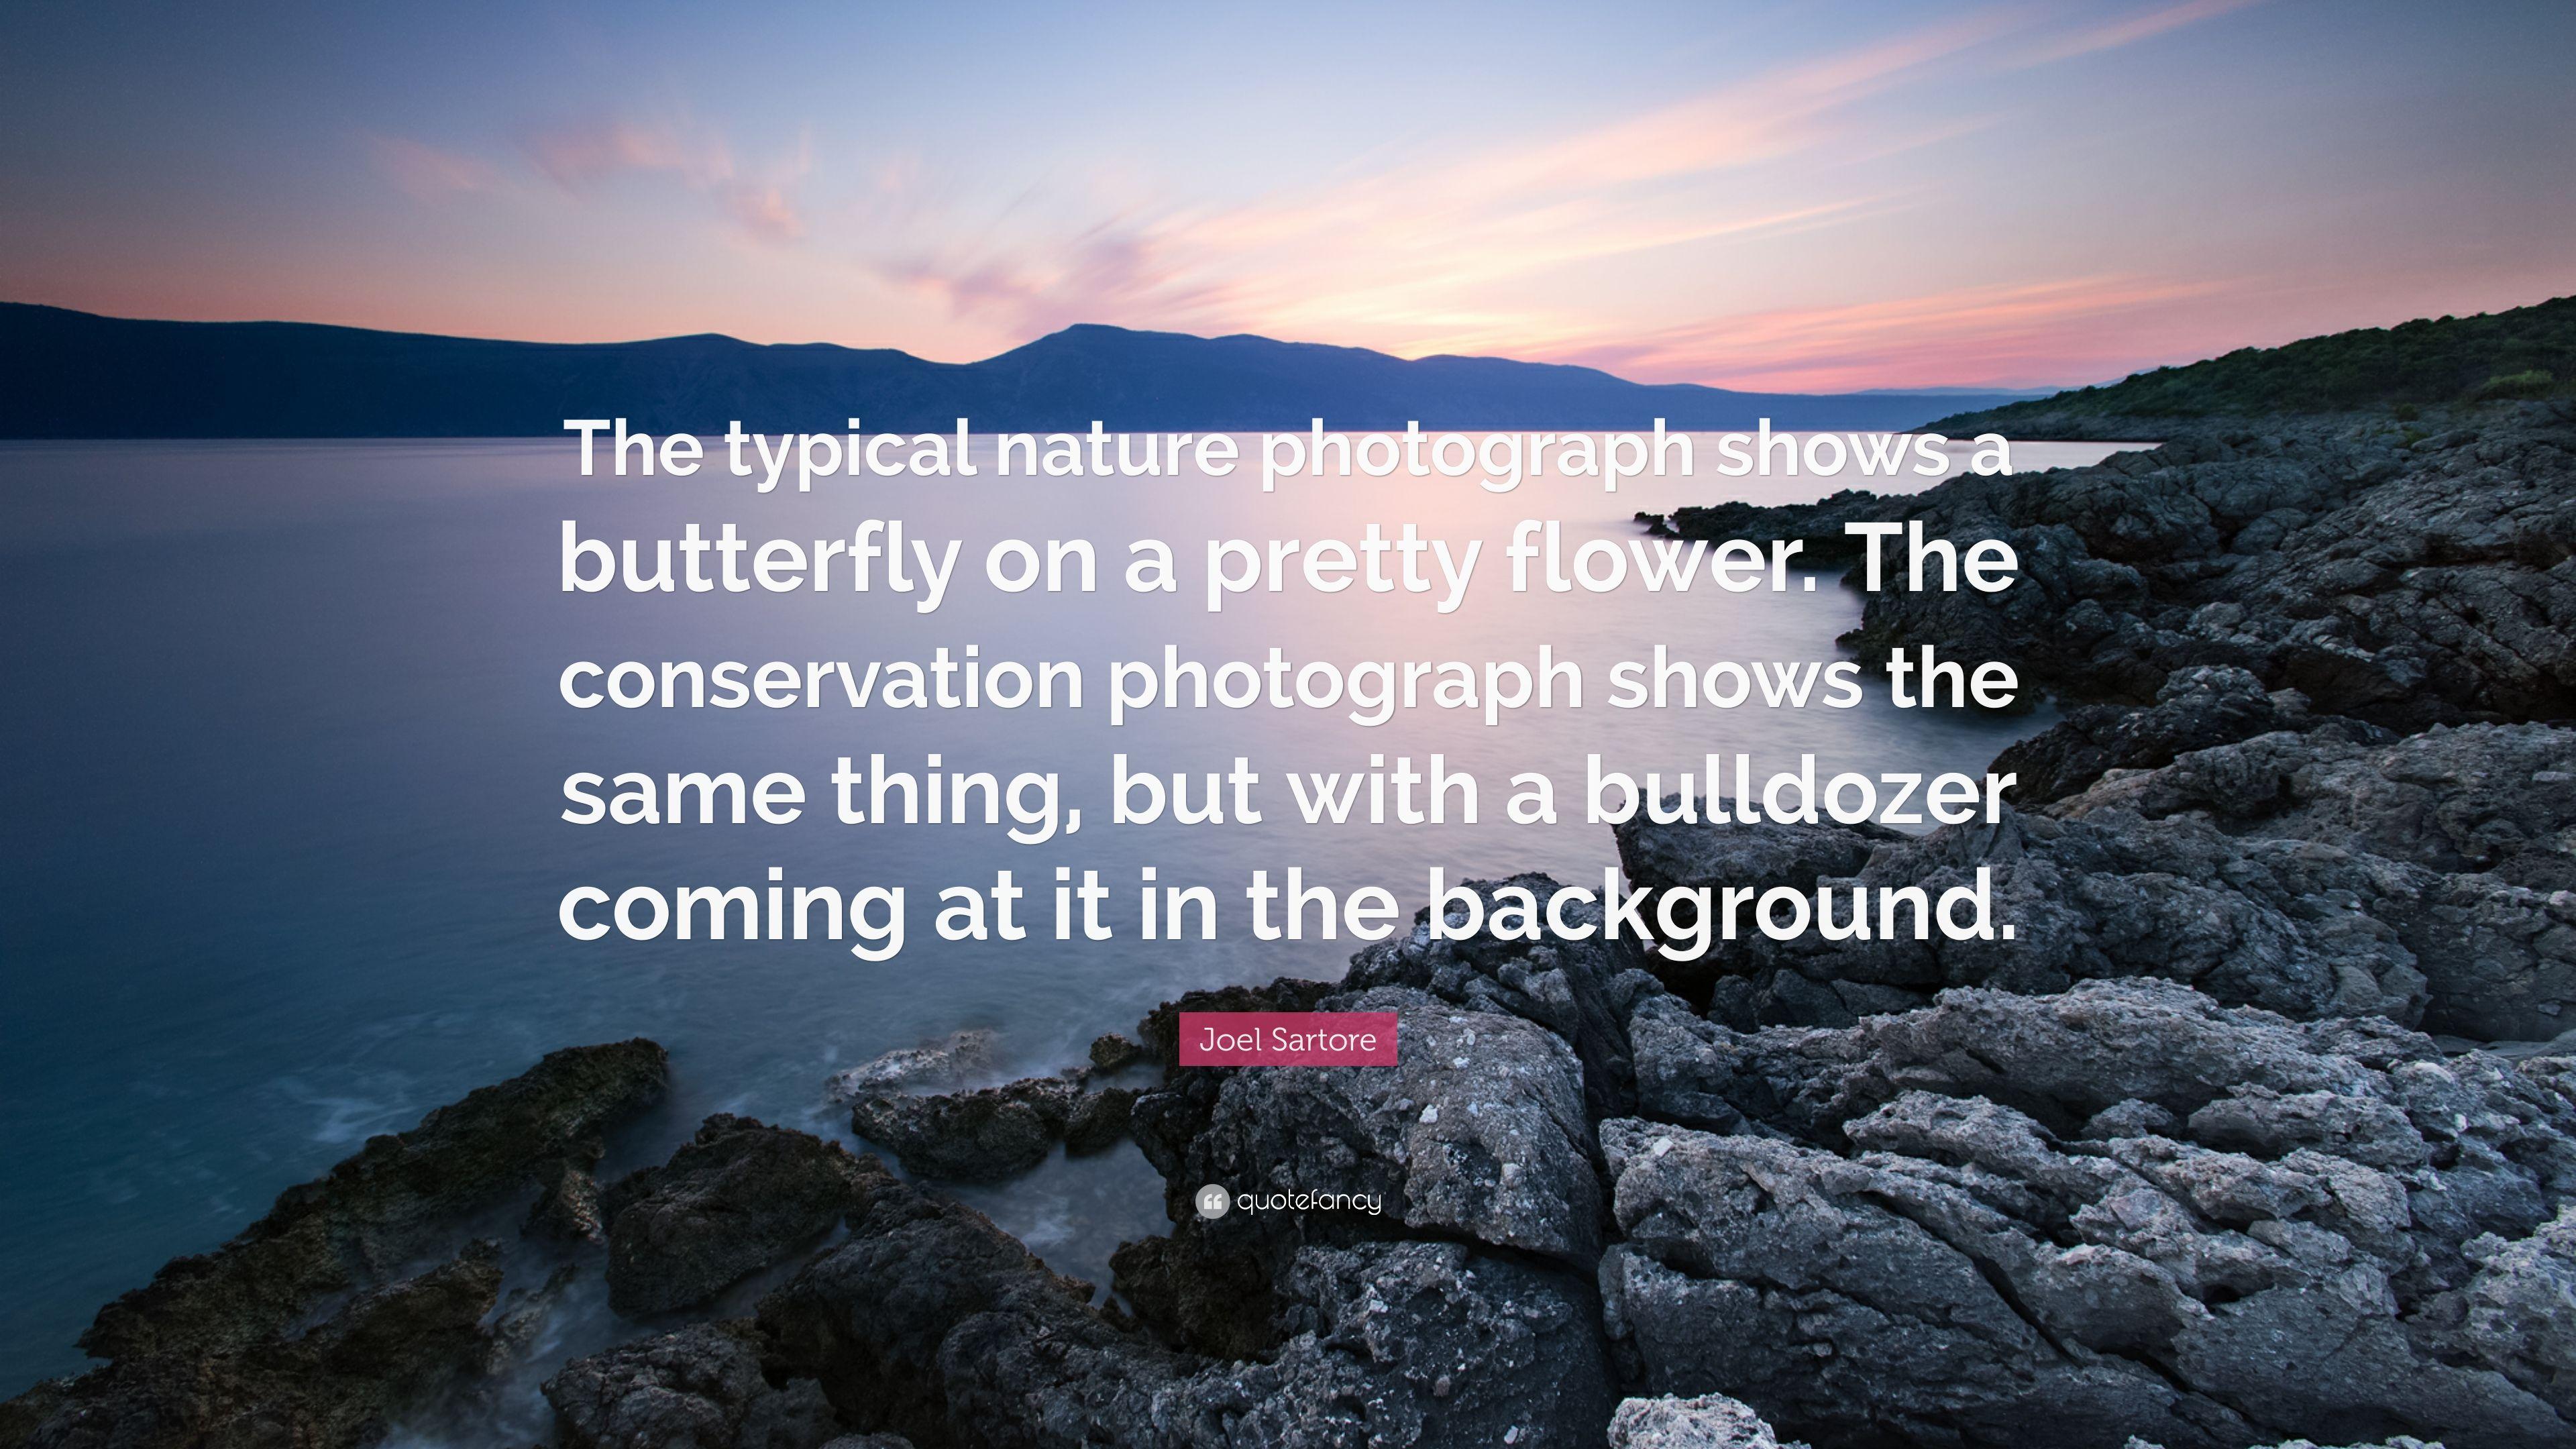 Joel Sartore Quote: “The typical nature photograph shows a butterfly